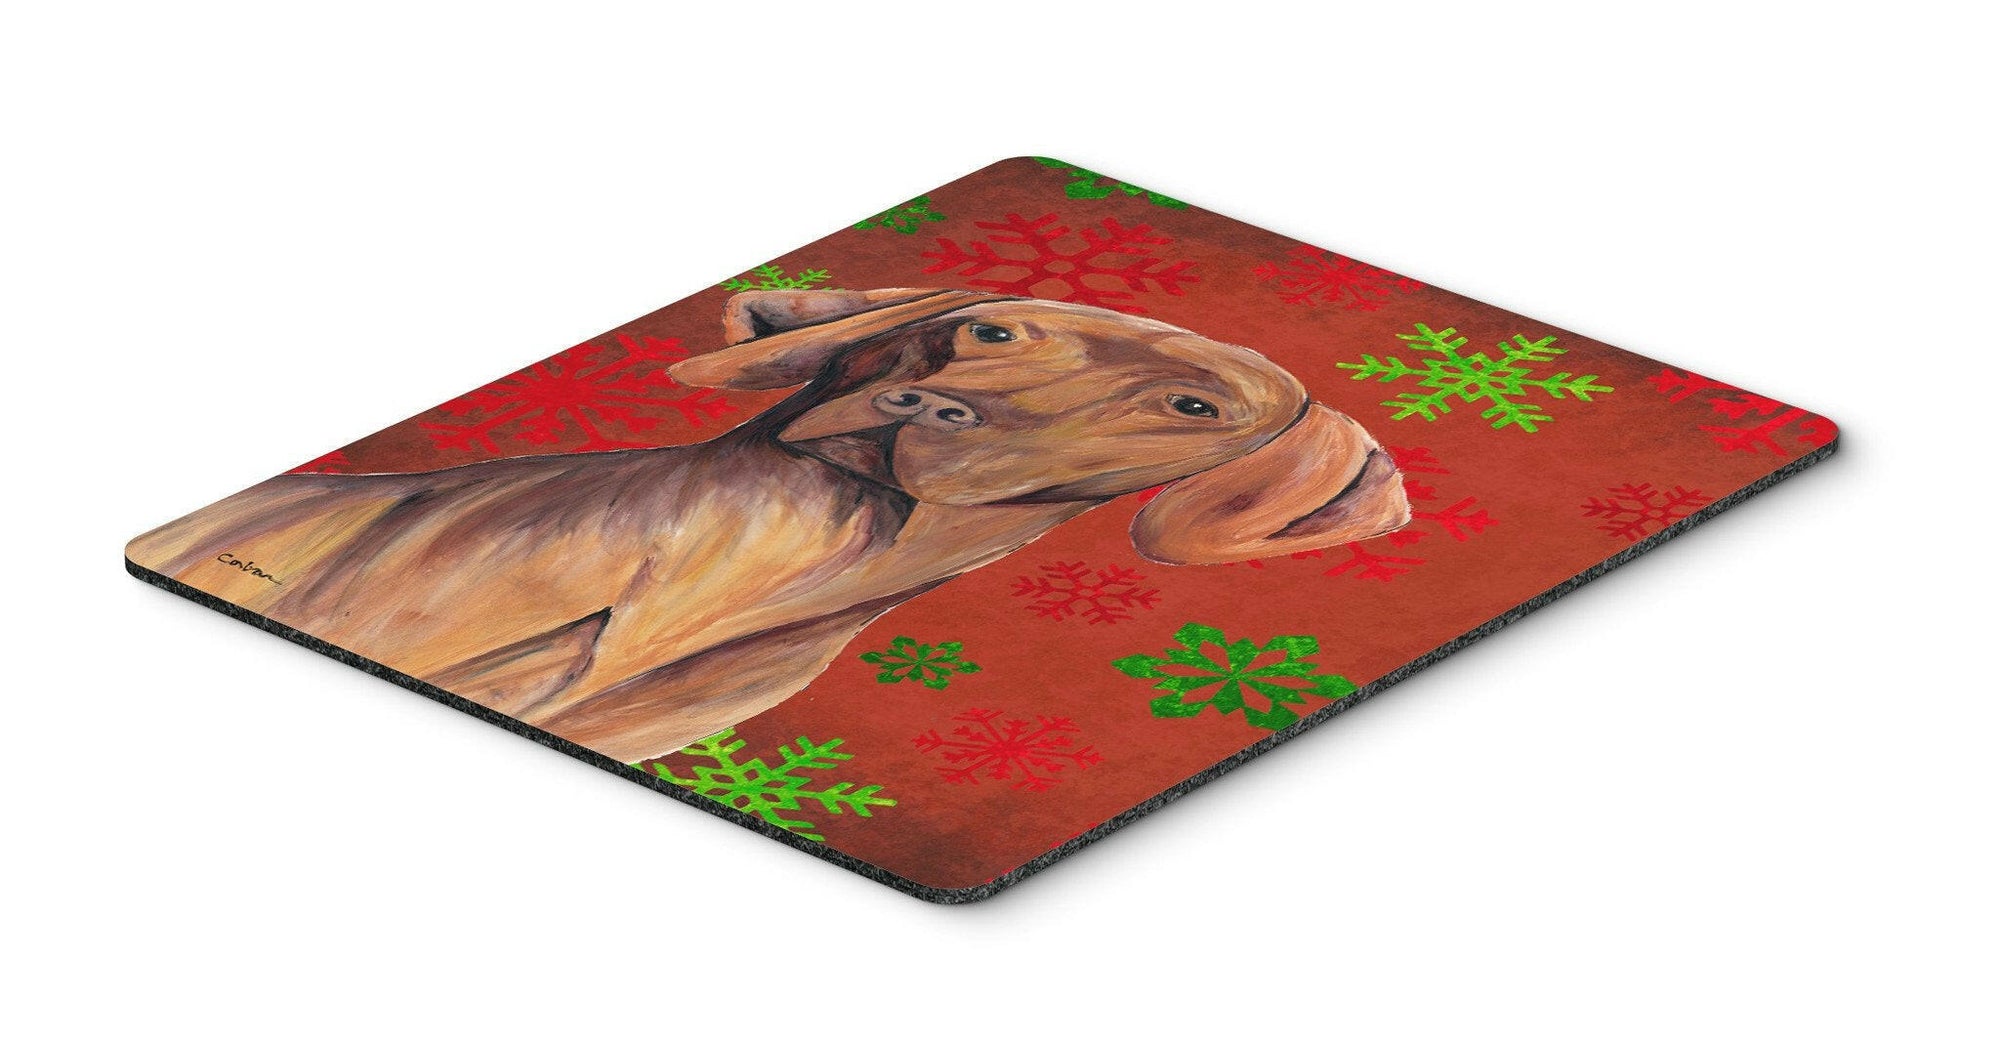 Vizsla Red and Green Snowflakes Holiday Christmas Mouse Pad, Hot Pad or Trivet by Caroline's Treasures